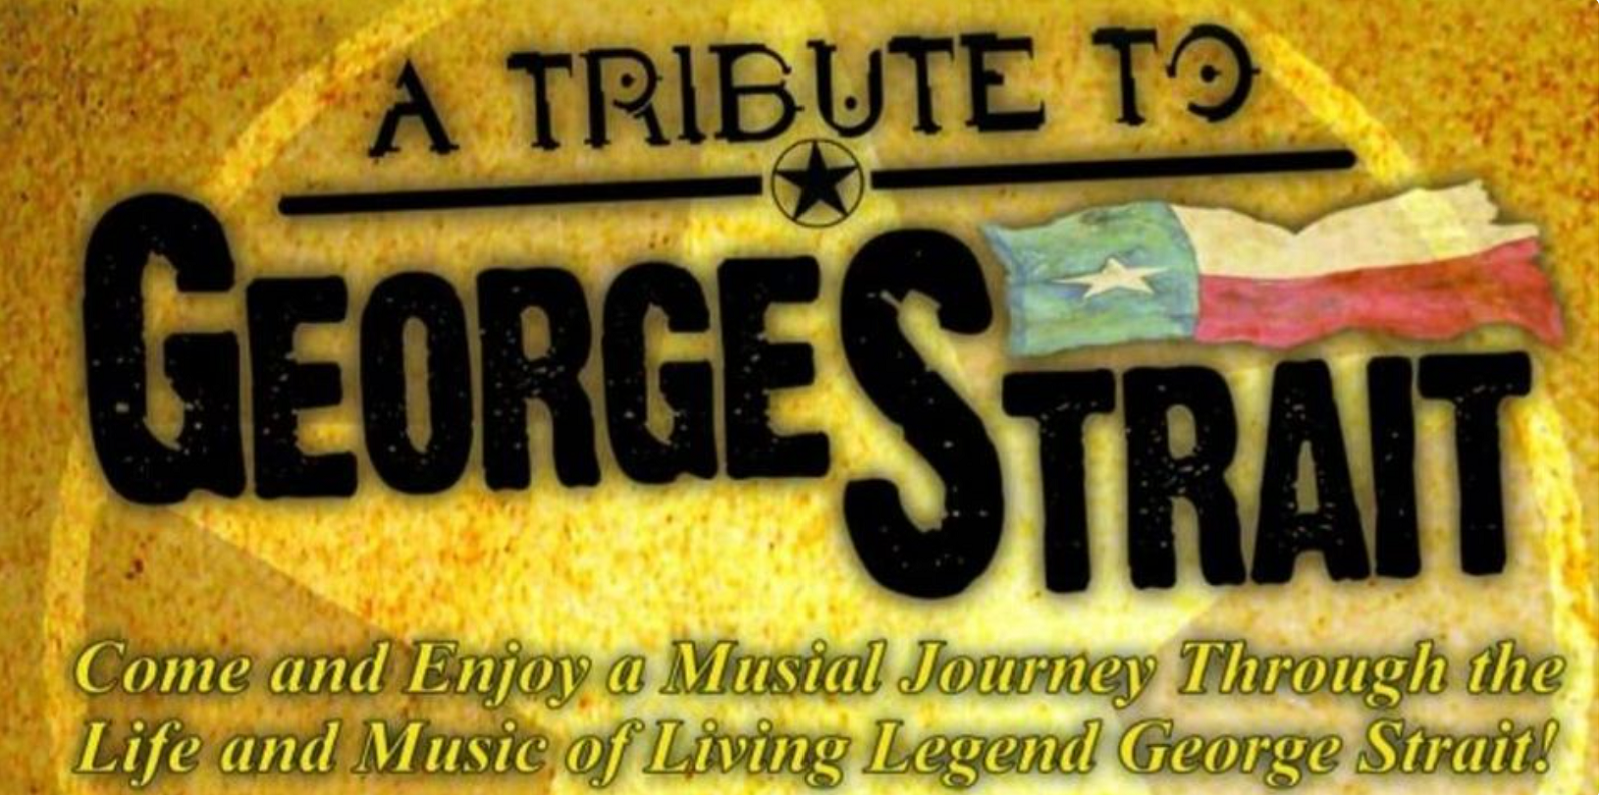 Click the Get Your Tickets for the July 30th George Strait Tribute! This Fundraiser Keeps our Faulk County Transit Bus in Business! slide photo to open